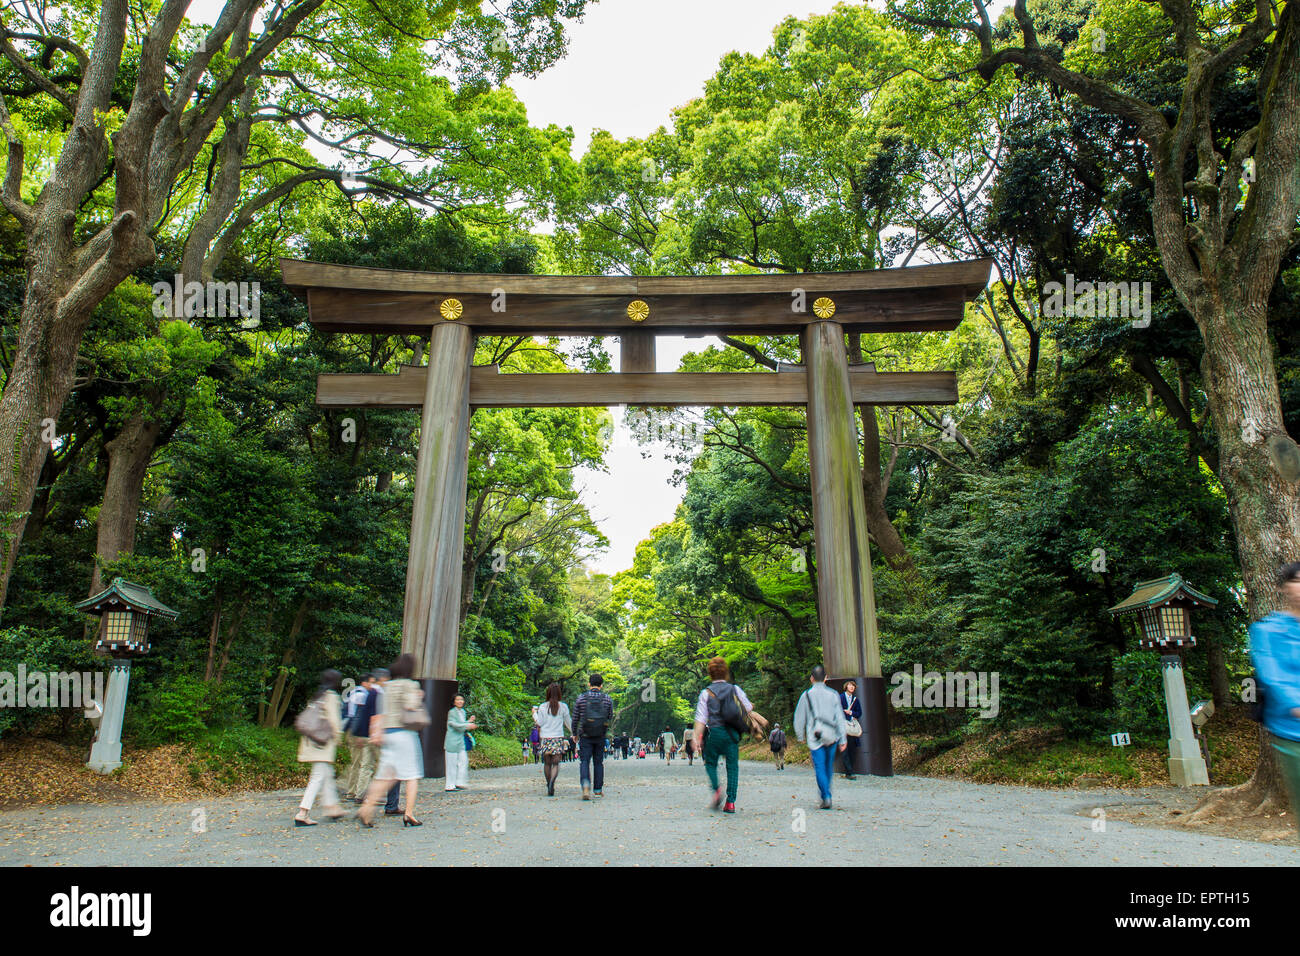 Large traditional gate into a park in Japan Stock Photo